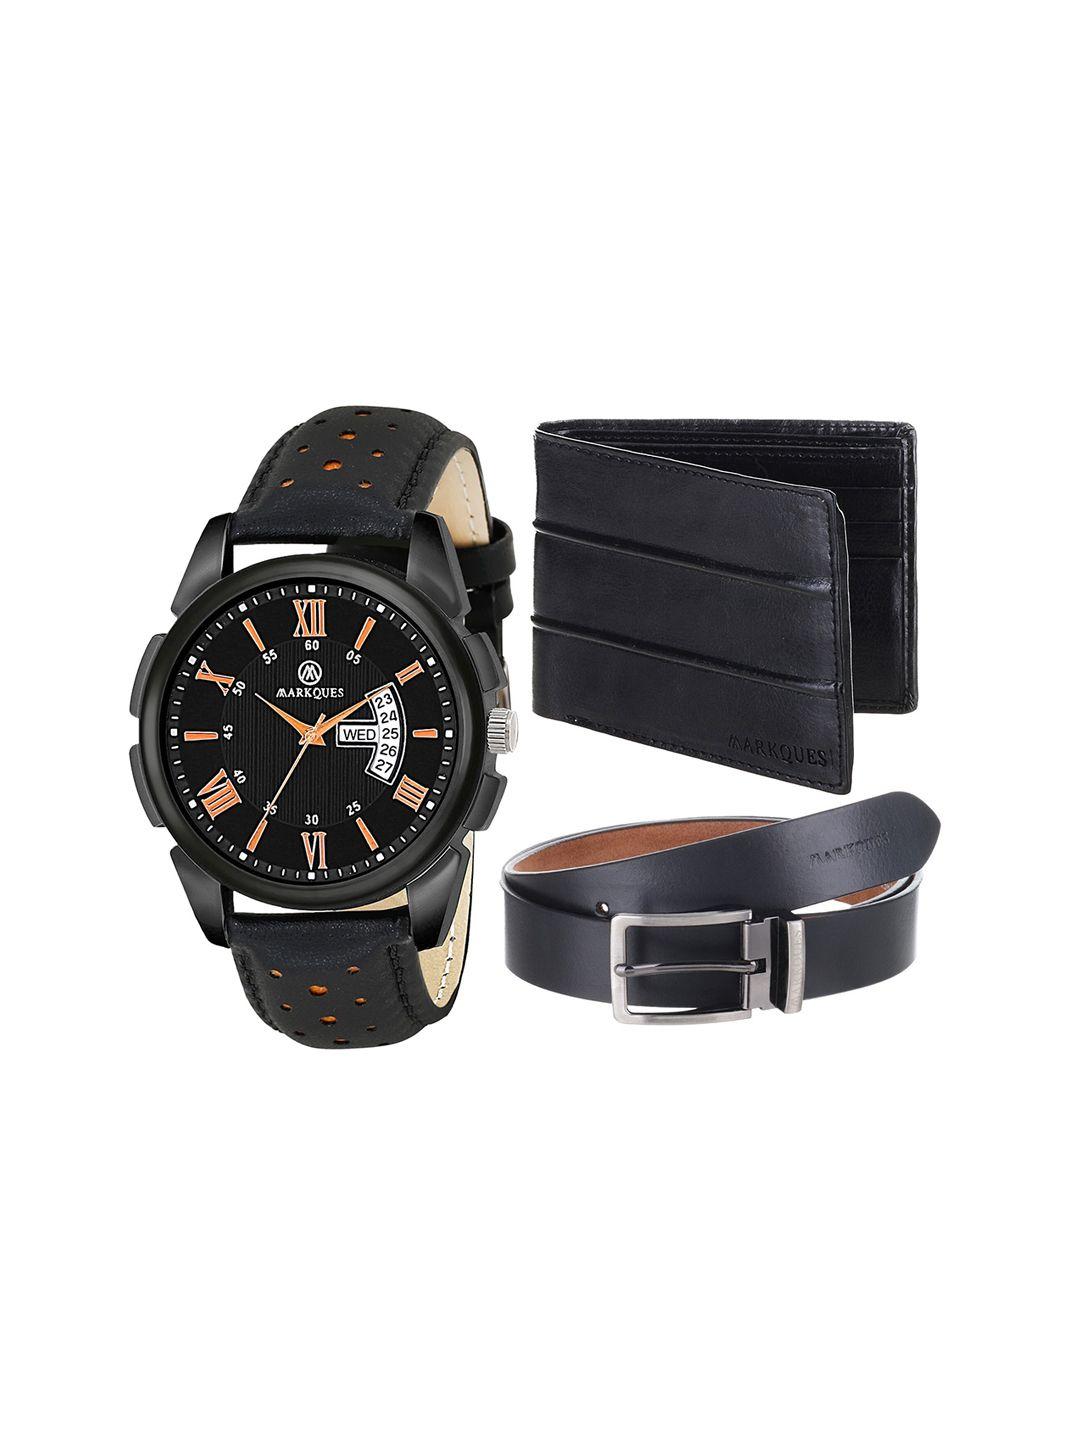 markques men black watch, belt and wallet combo accessory gift set